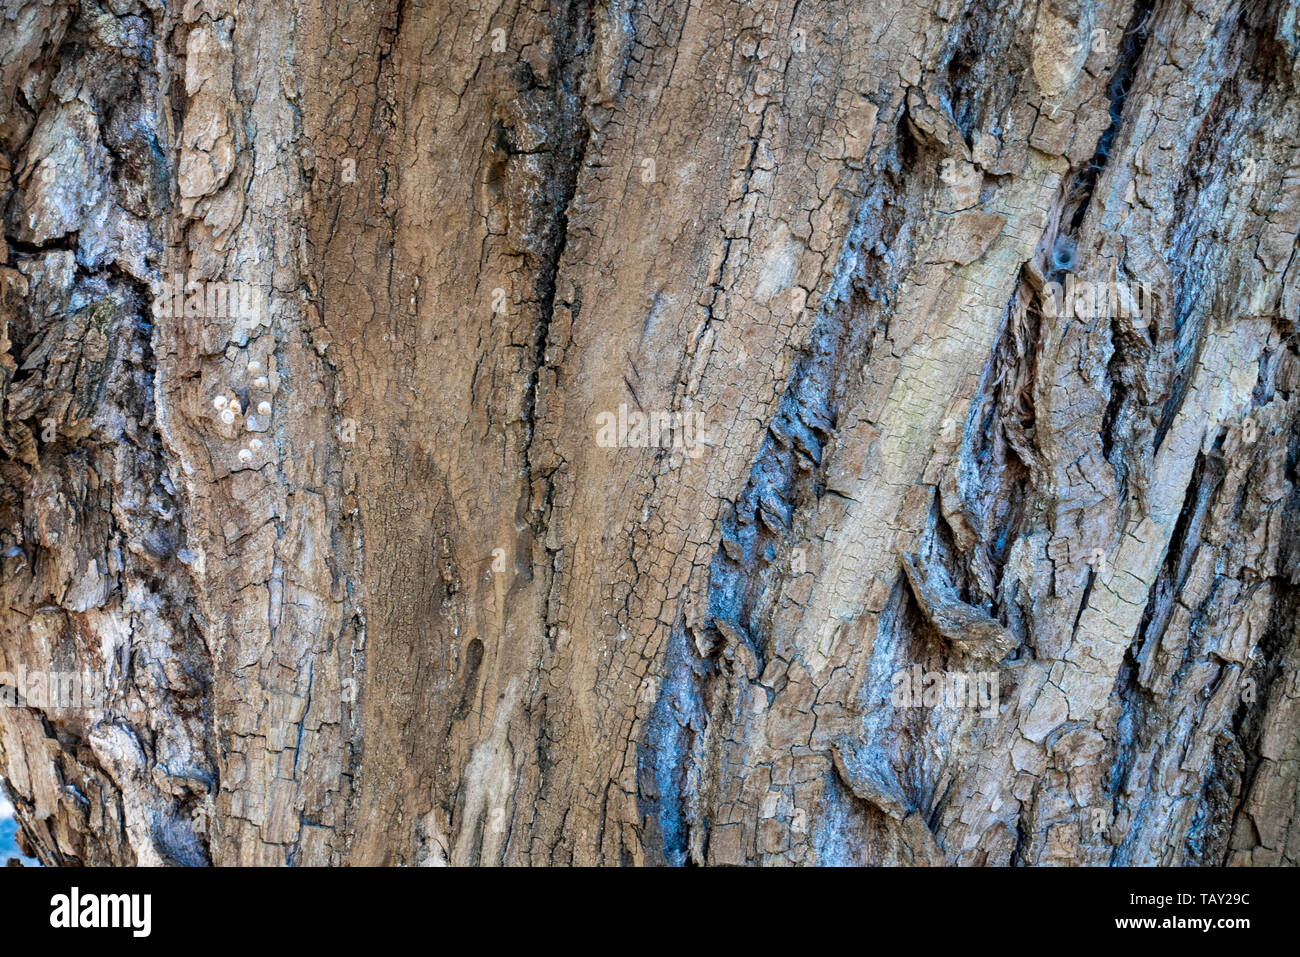 Bark of tree with different colors. The elm (scientific name Ulmus procera) is a large deciduous tree. Its bark is peeled in several layers. Stock Photo